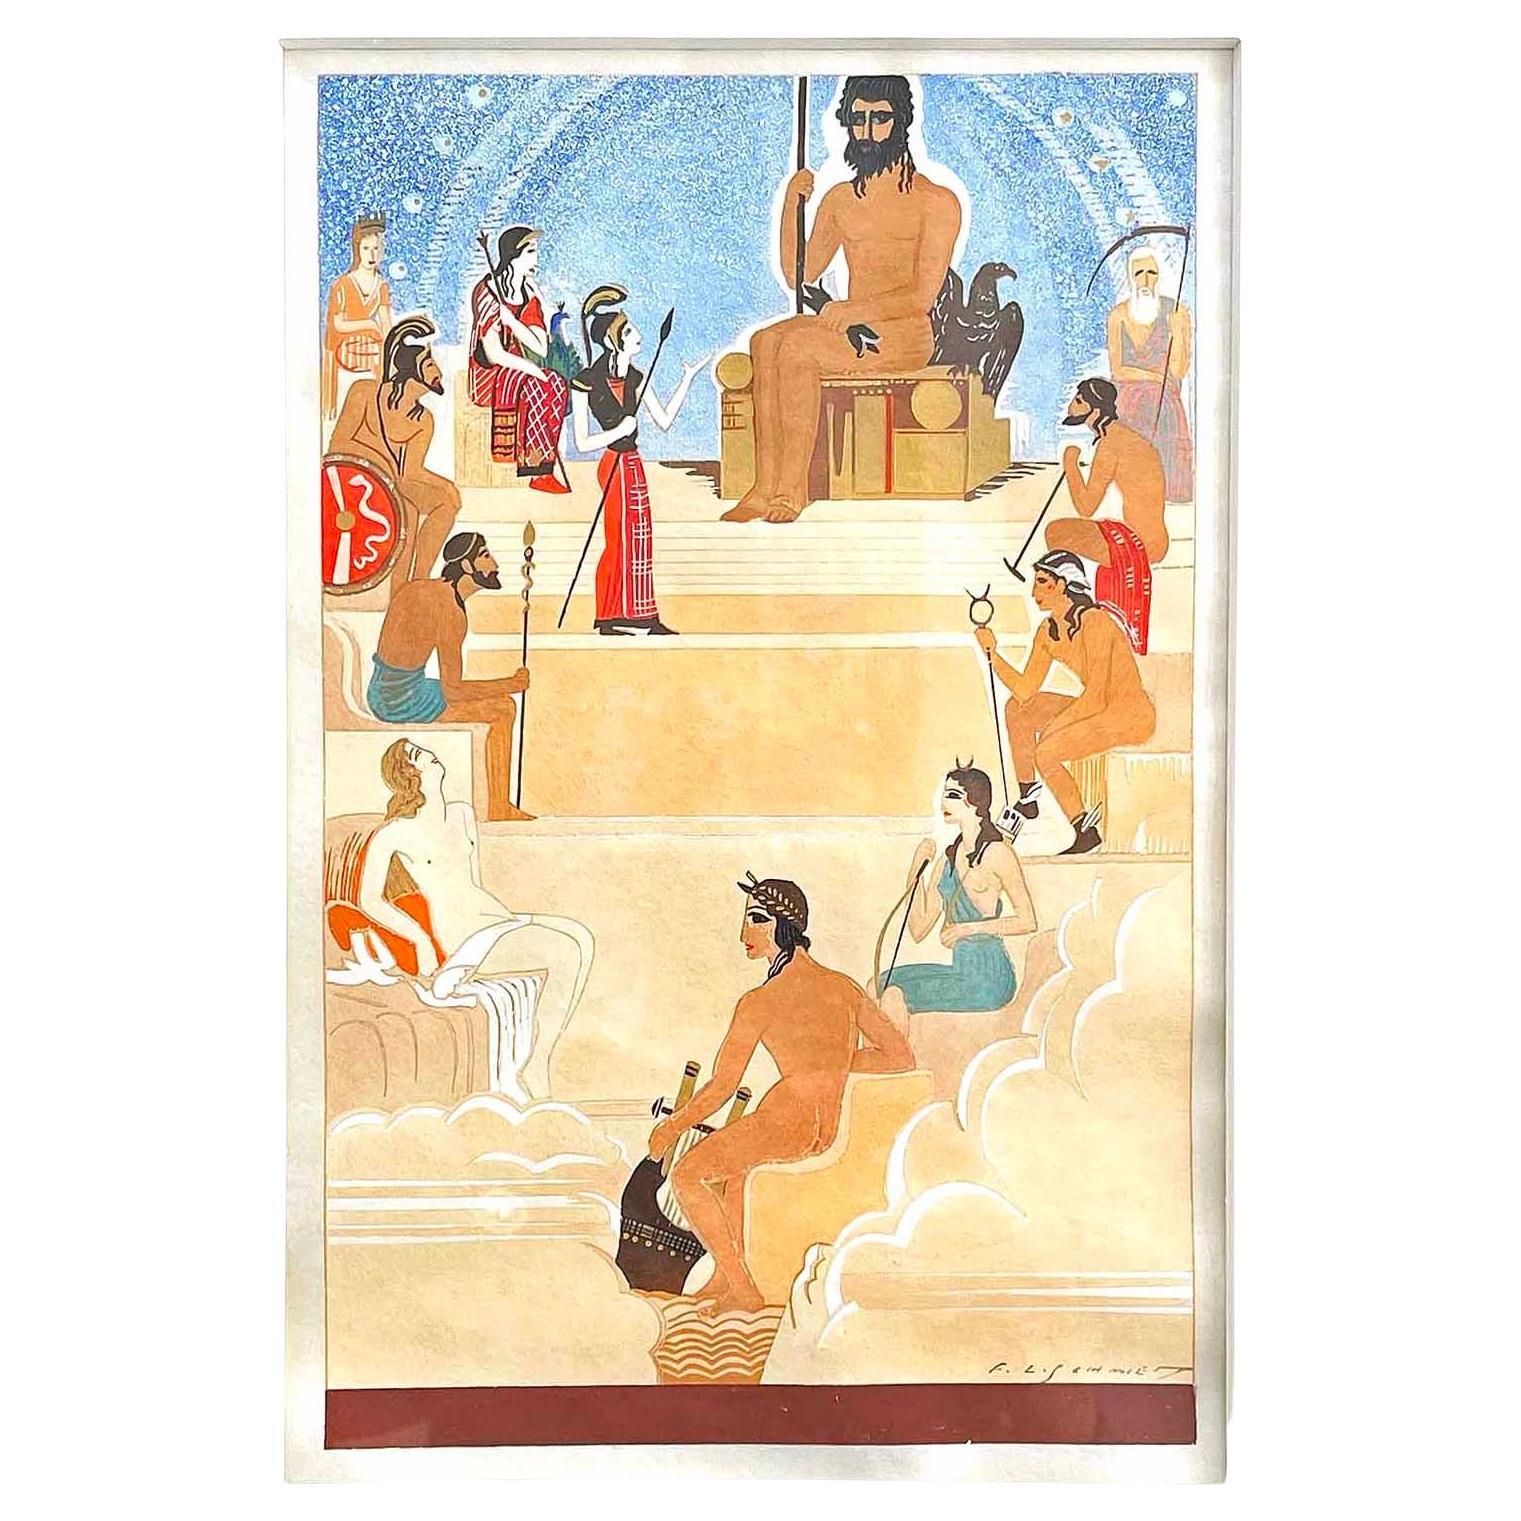 "Zeus and Gods of Olympus", Art Deco Masterpiece by Schmied for "L'Odyssee"